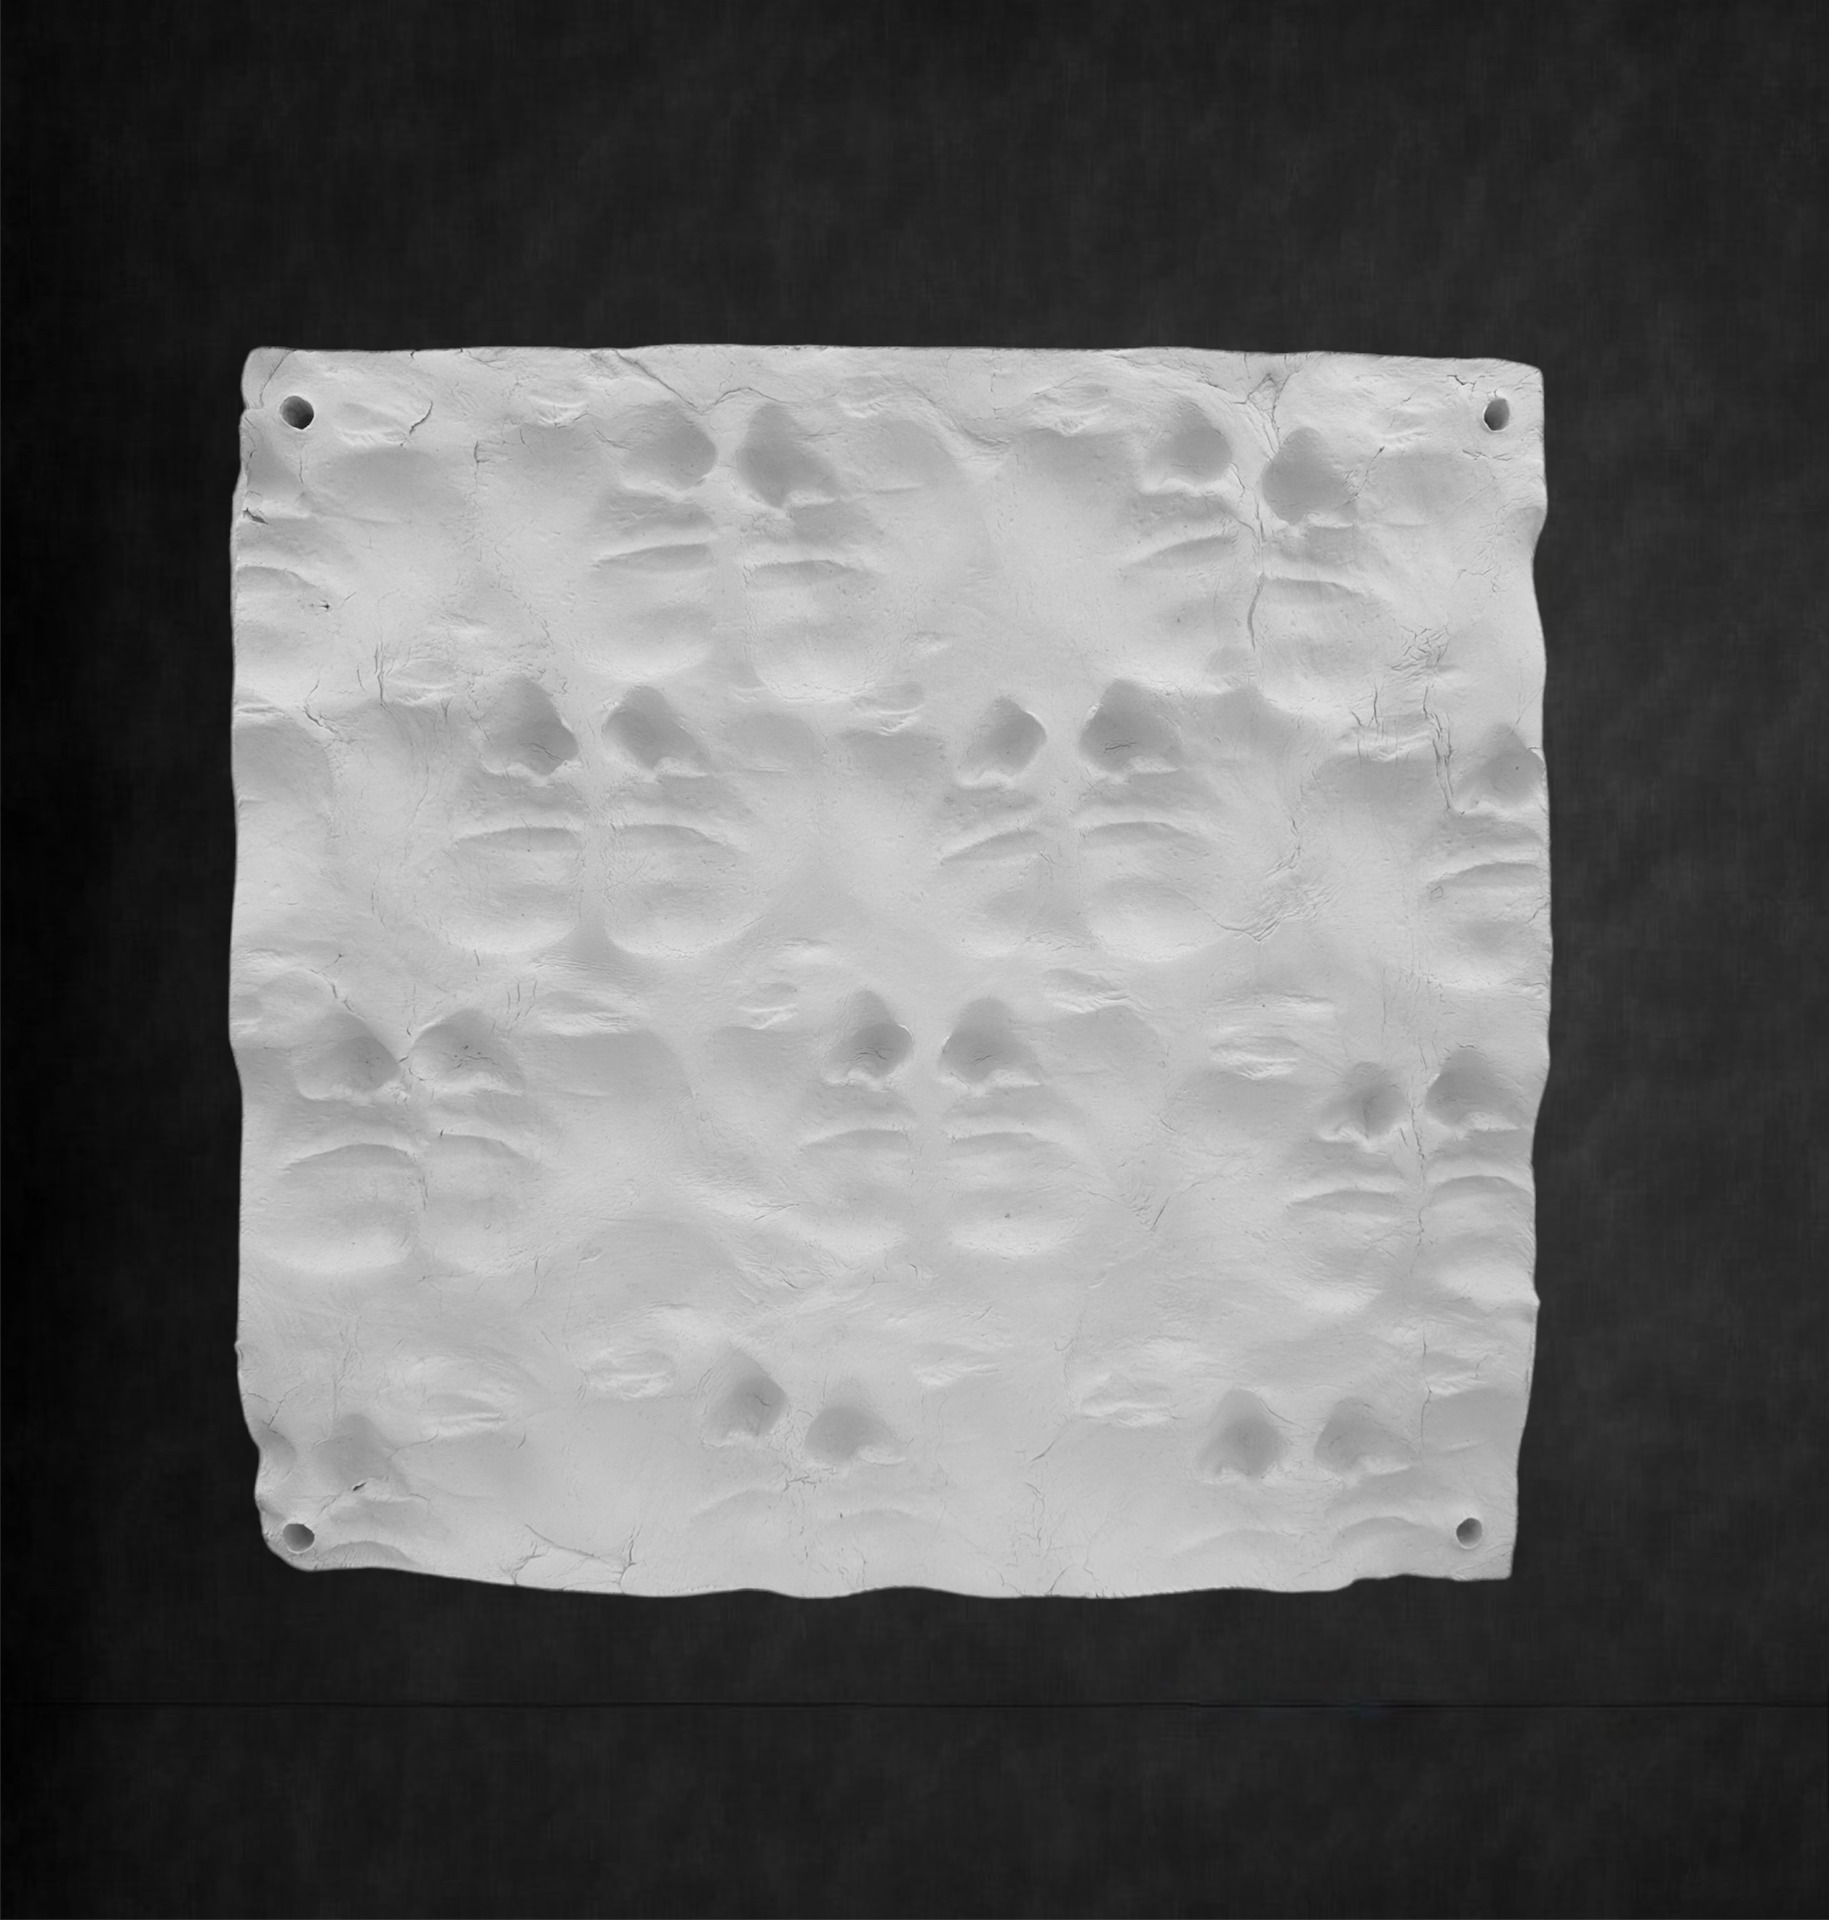 Patterned sculpture formed by facial imprints in clay